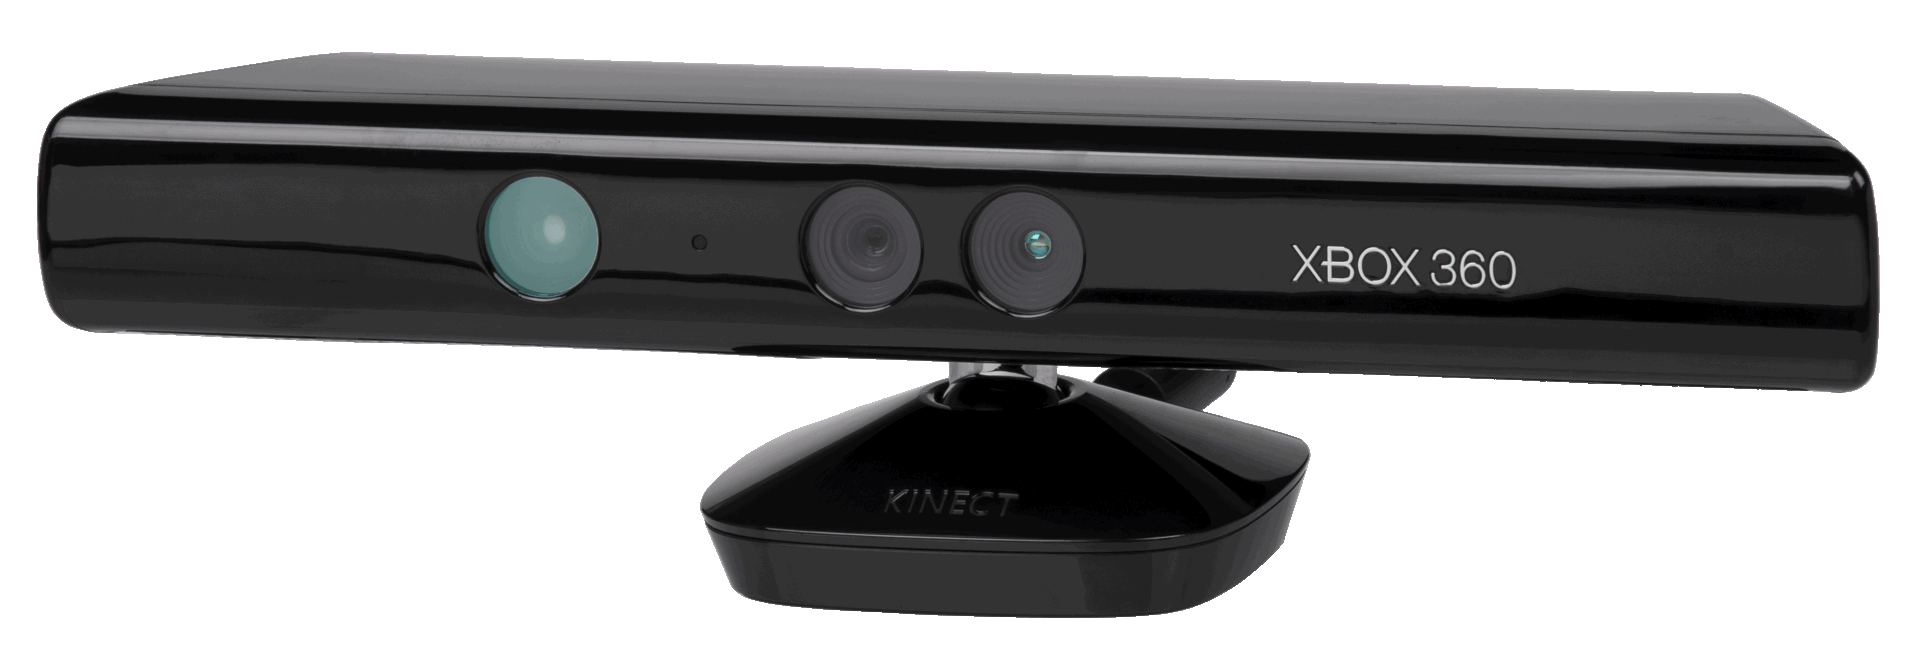 Xbox Kinect xbox 360 kinect red light